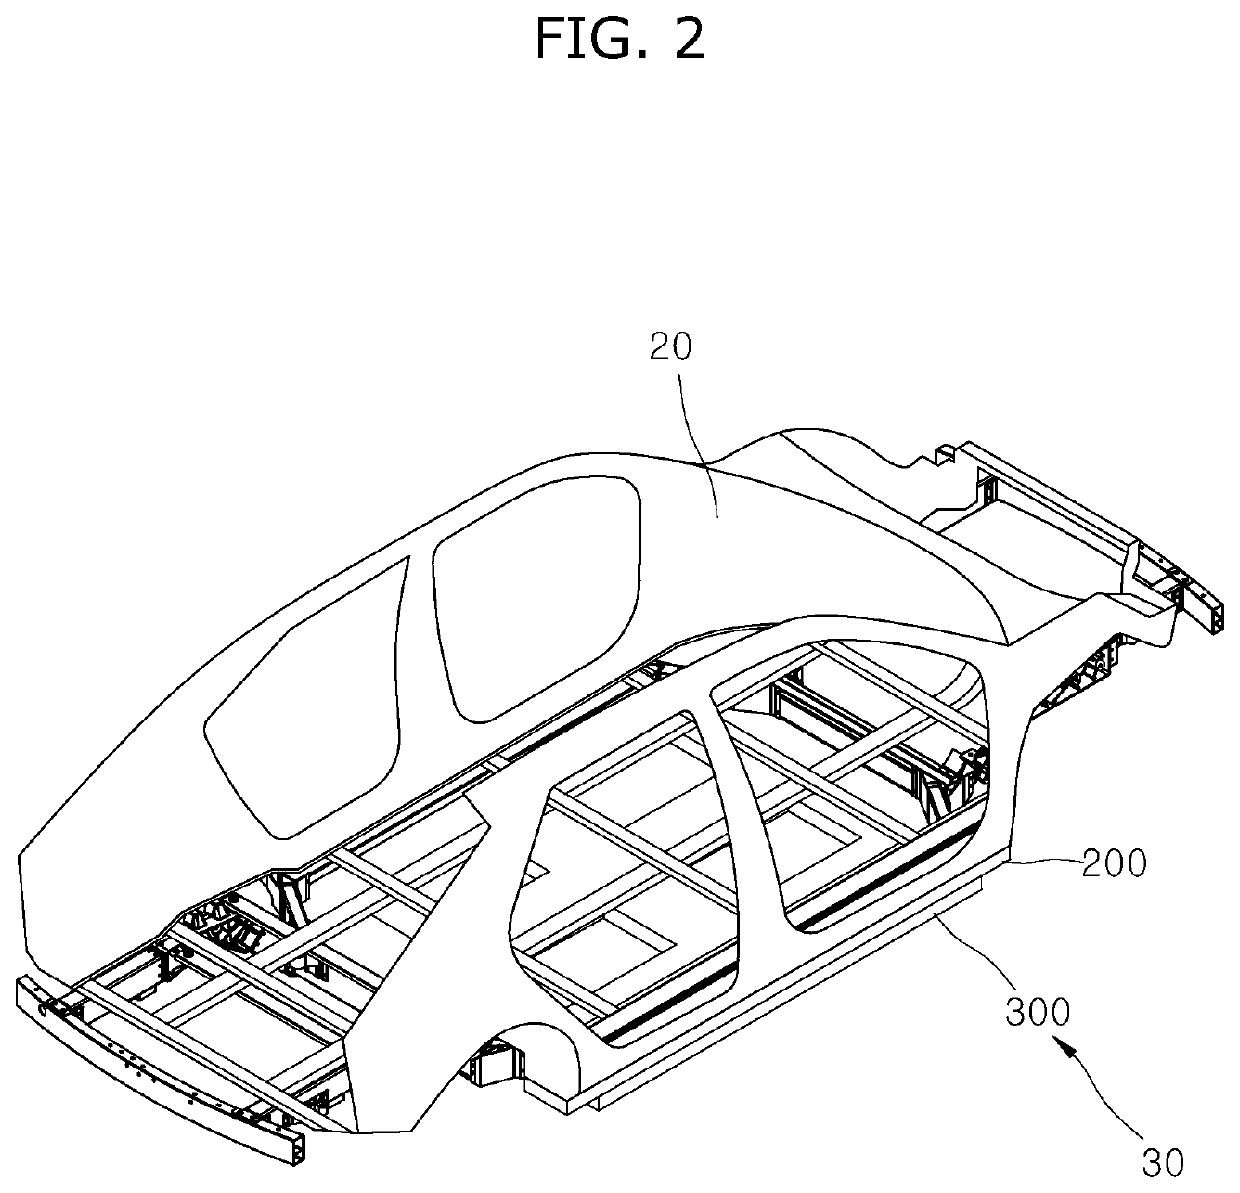 Coupling structure of vehicle body and chassis frame